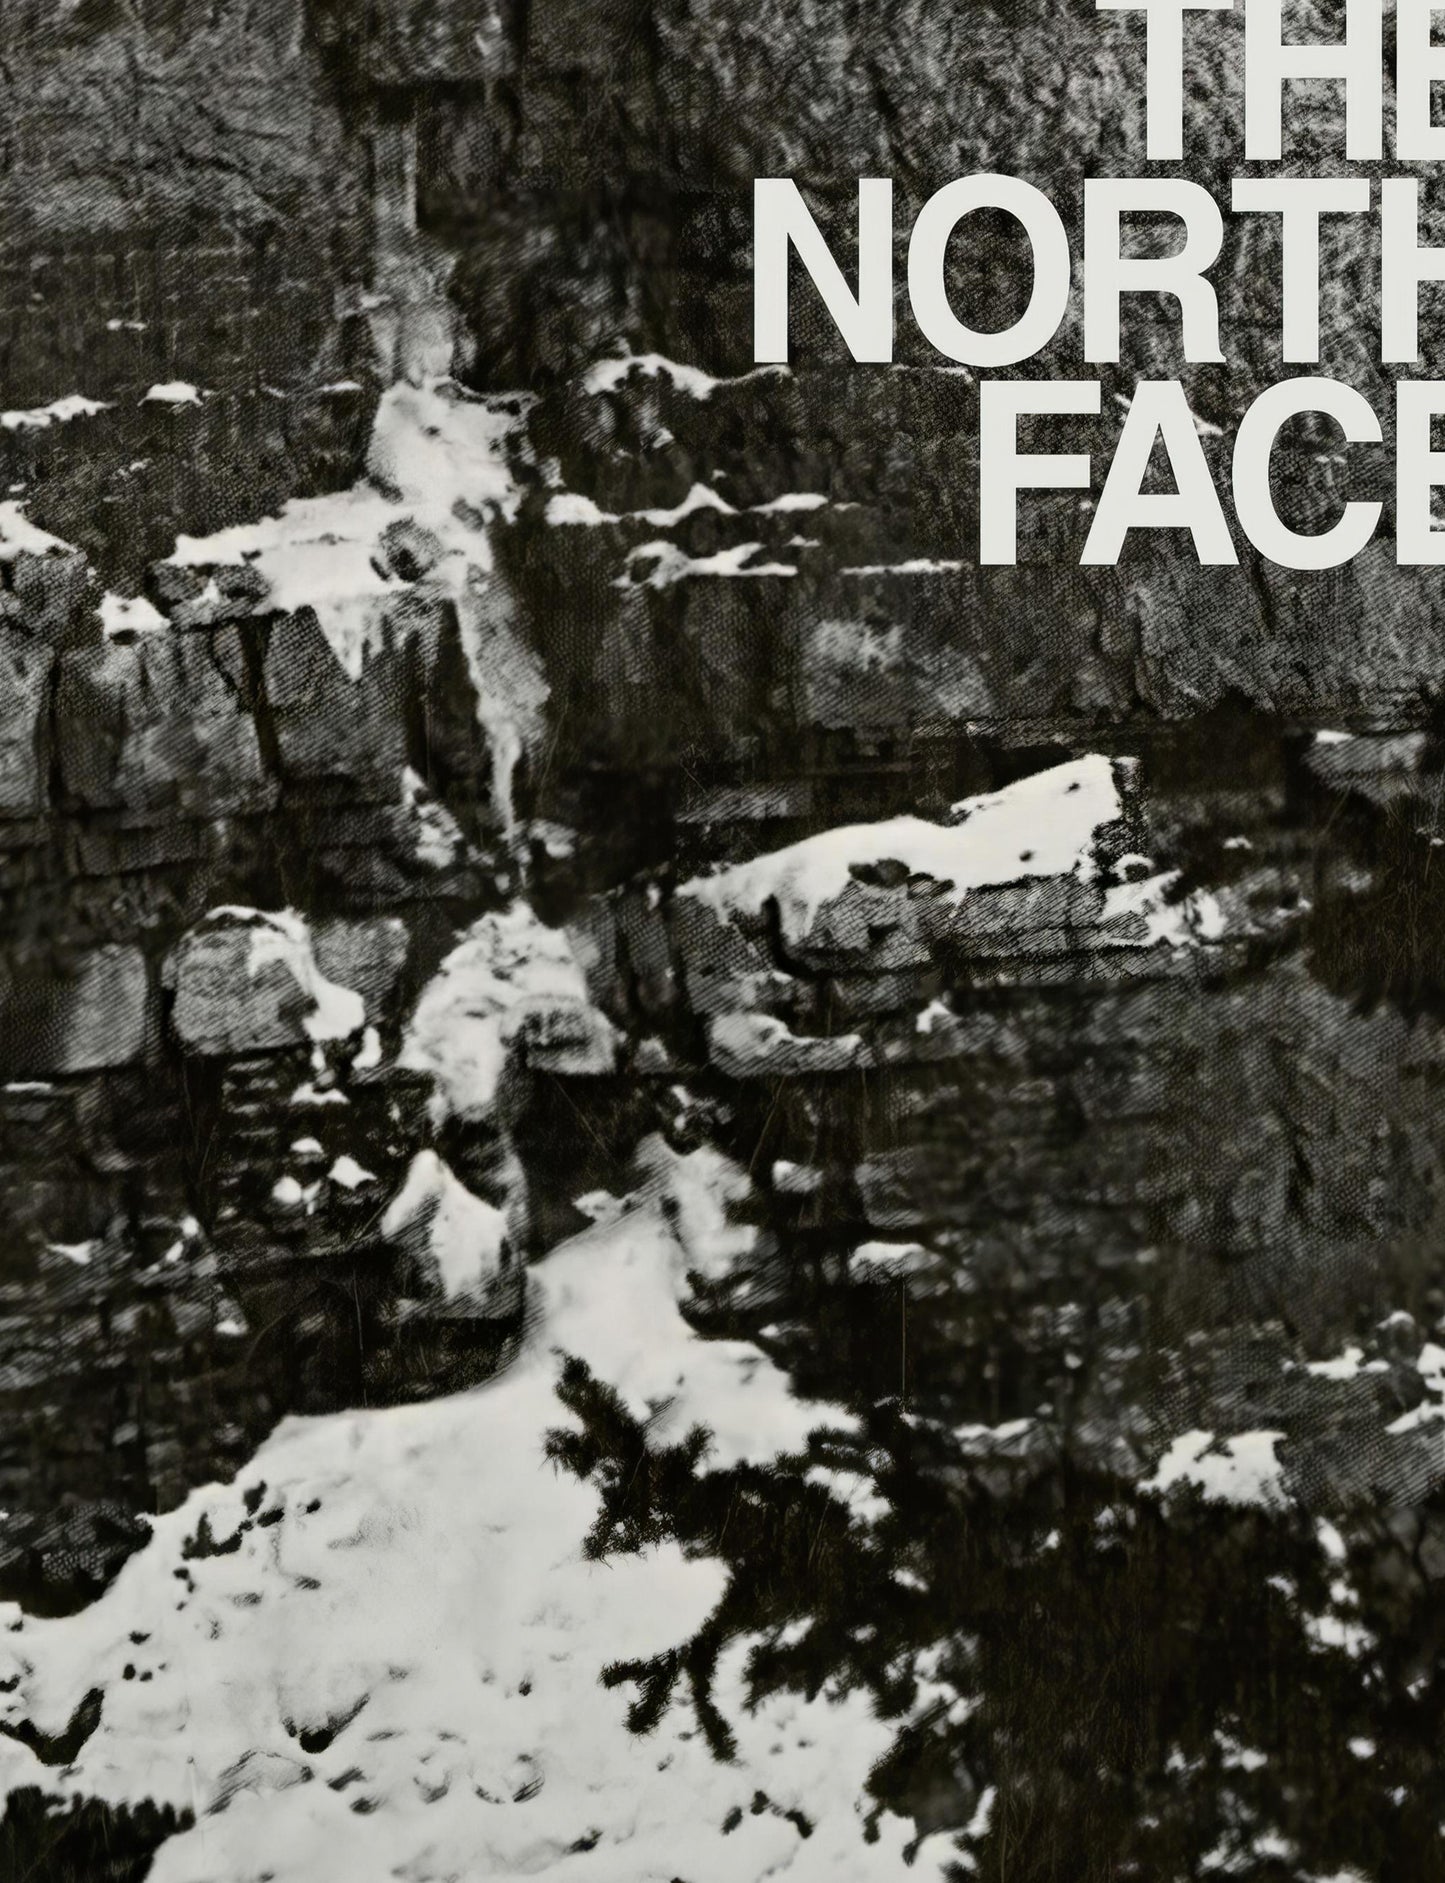 The North Face Magazine Front Cover Poster